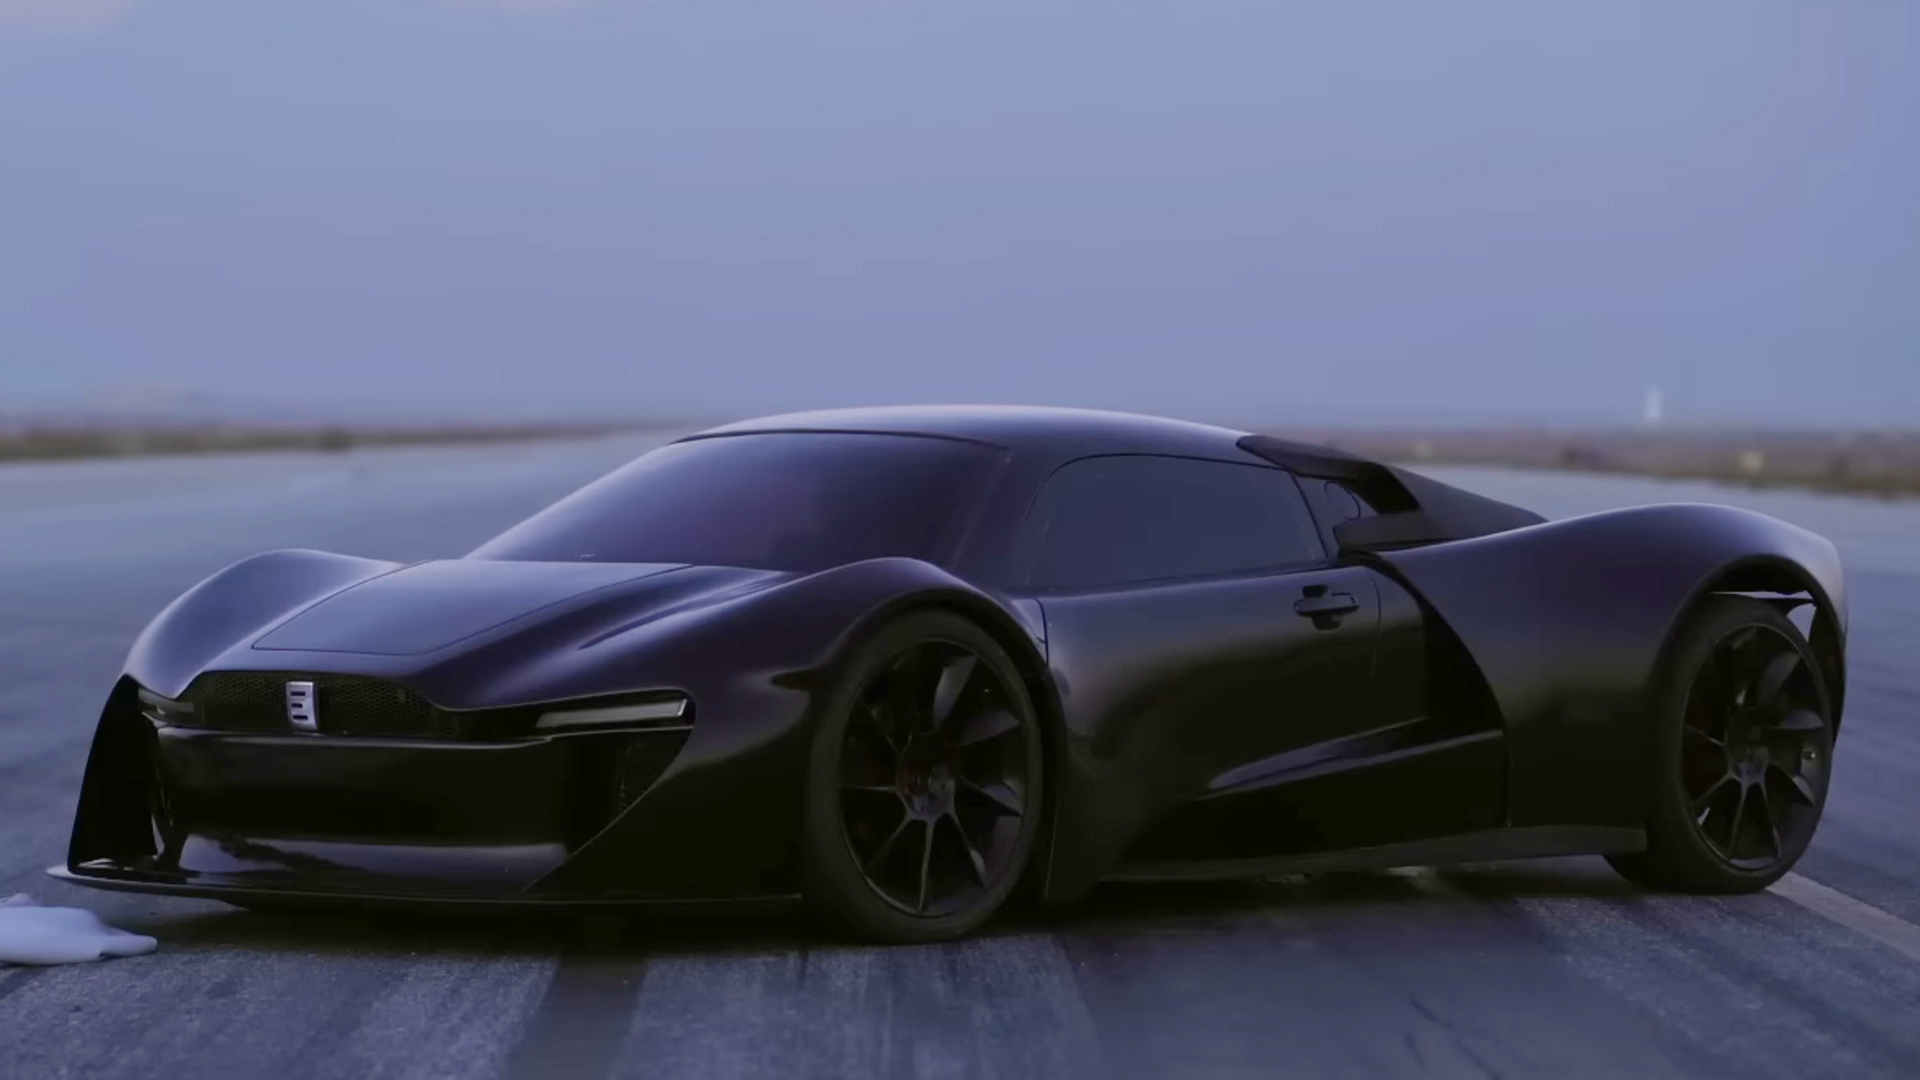 Afghanistan's First Supercar is a Corolla-Powered NSX-McLaren-Looking Mashup